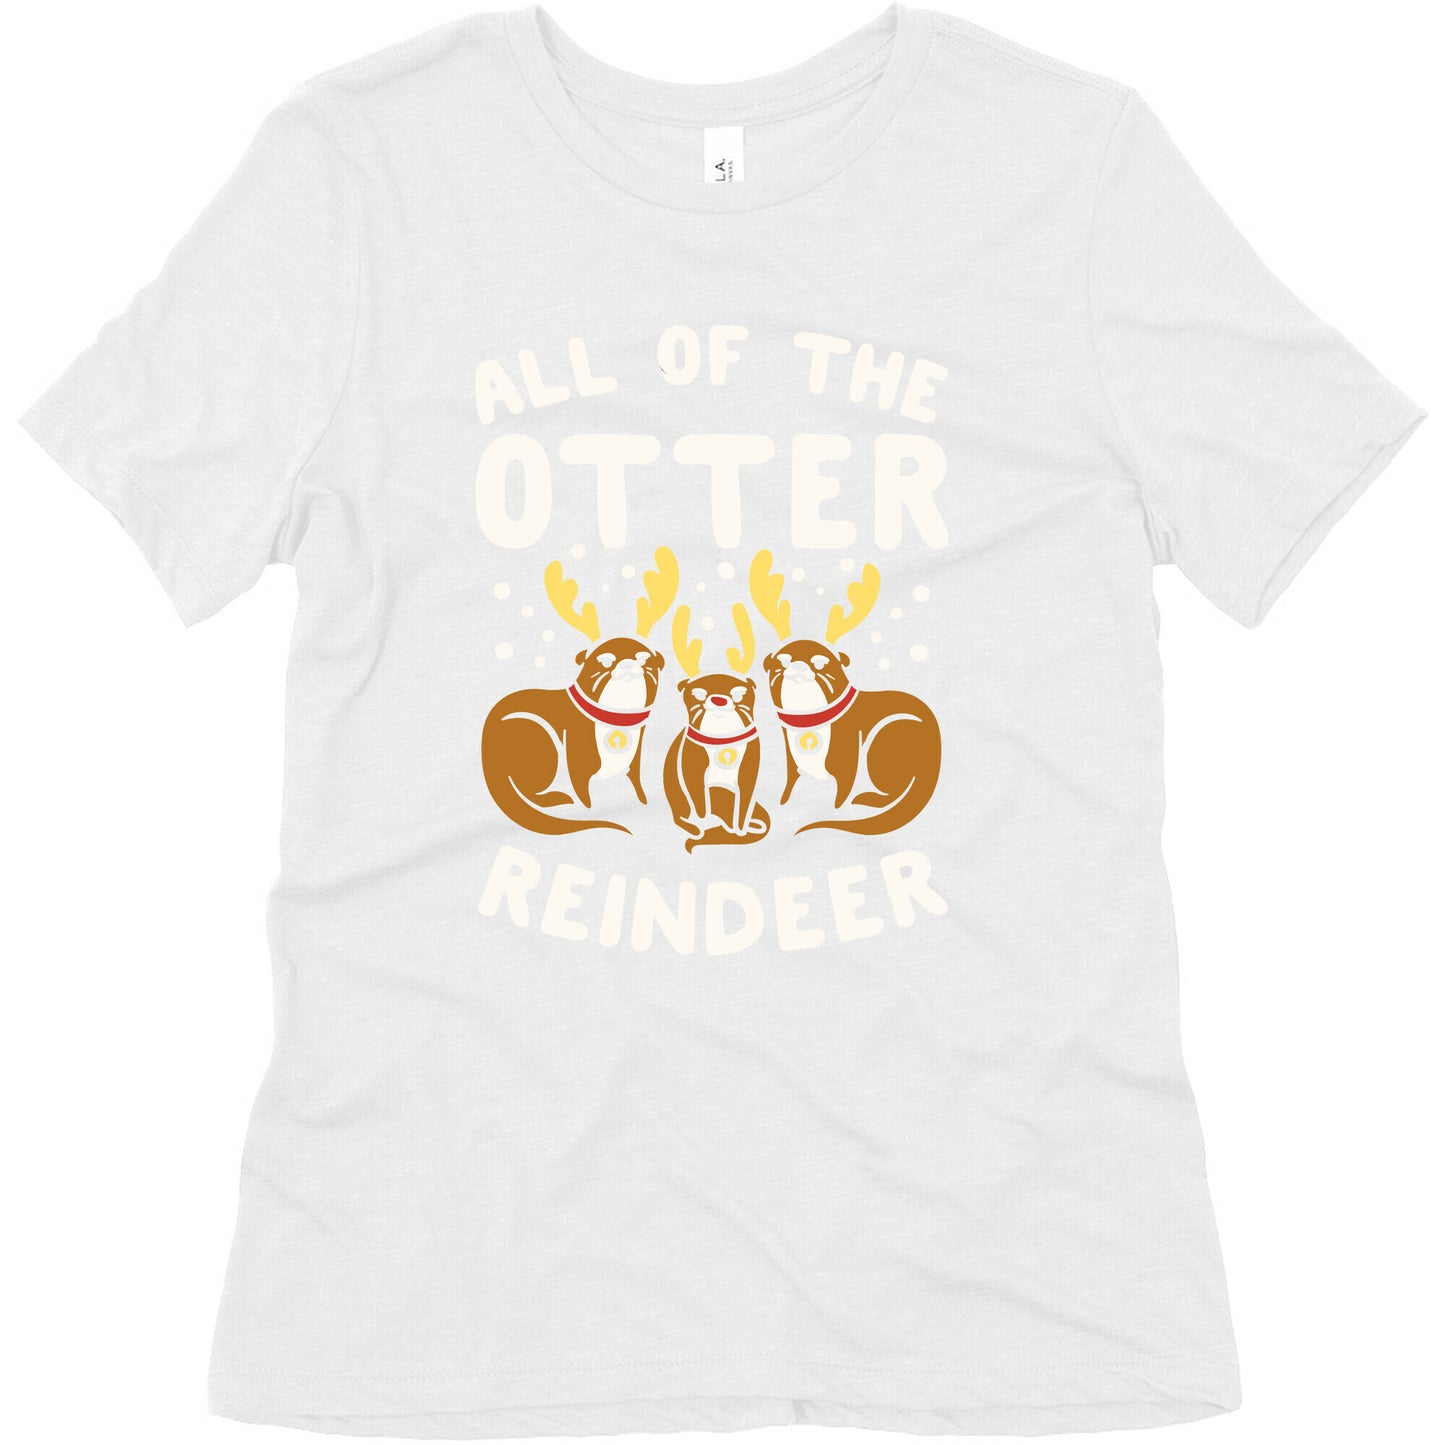 All of The Otter Reindeer Women's Triblend Tee